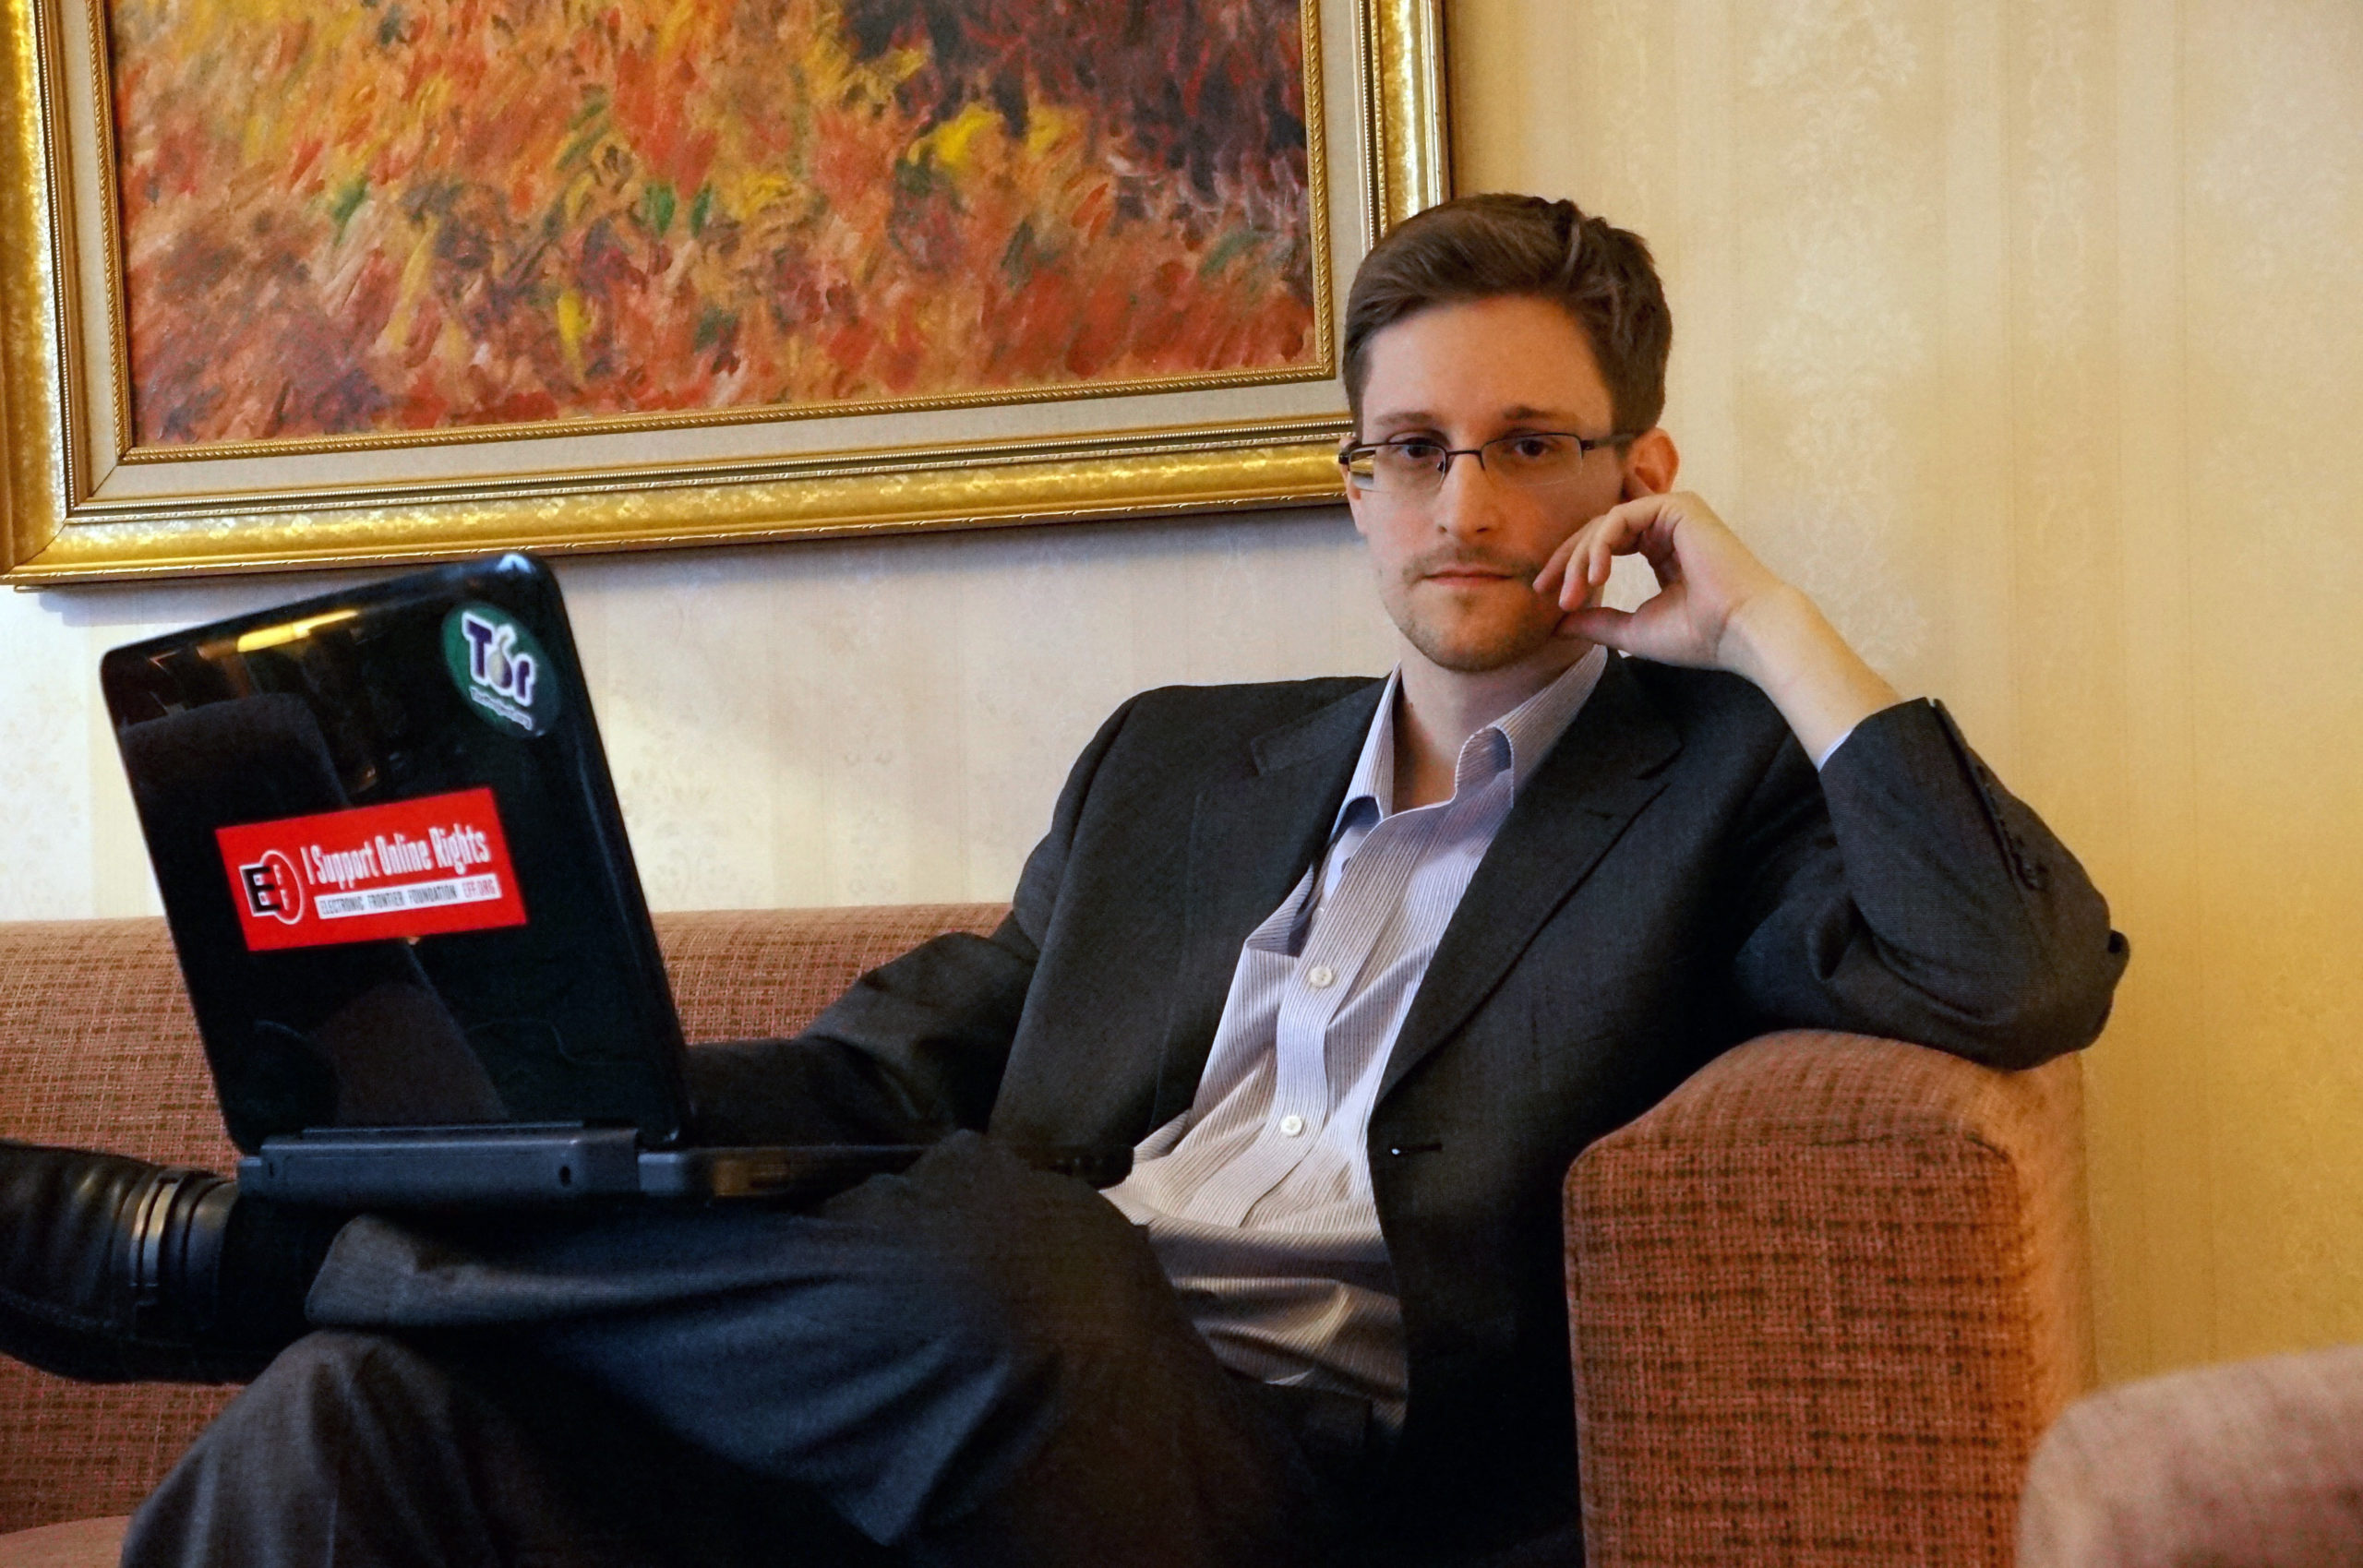 Edward Snowden says use crypto, don't invest in it: 'Bitcoin is what I used to pay for the servers pseudonymously'